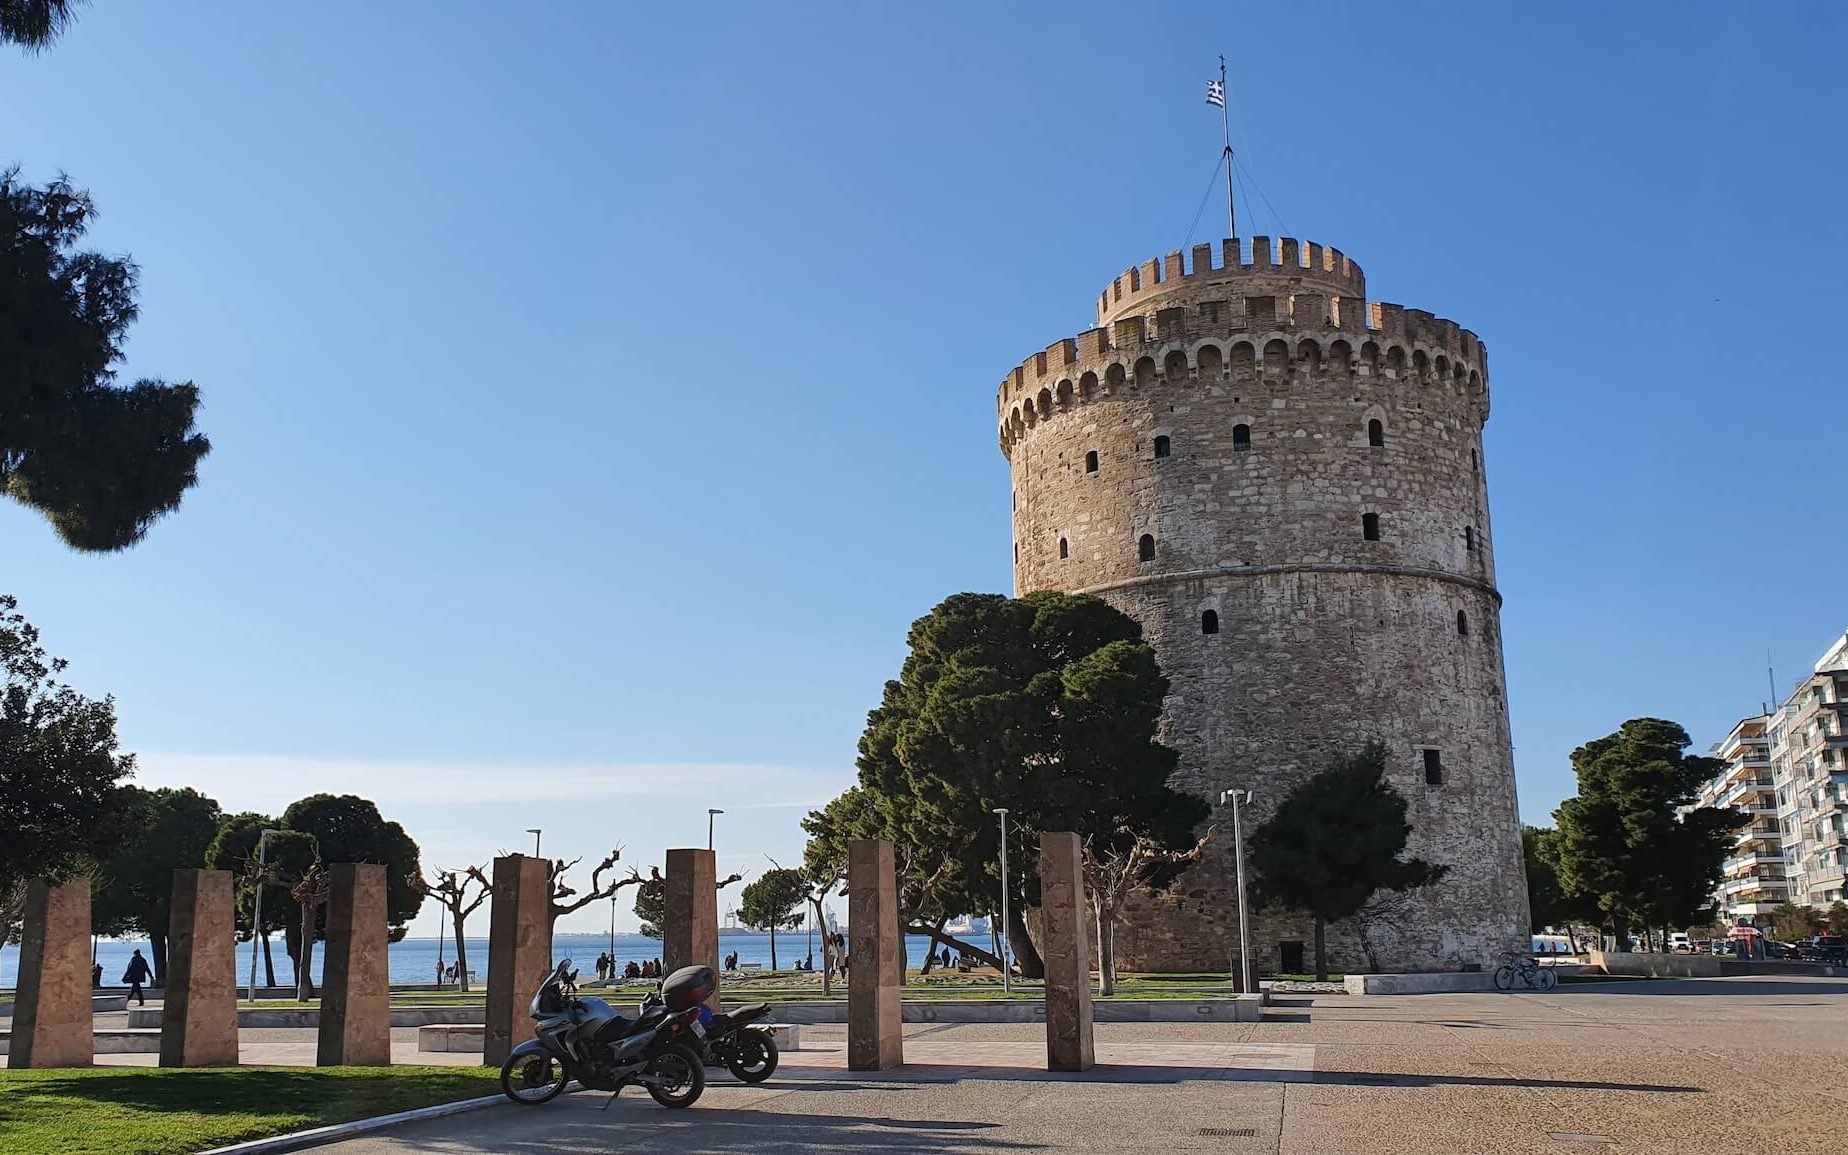 Gazing out over the vibrant cityscape of Thessaloniki, a hub of culture and history.